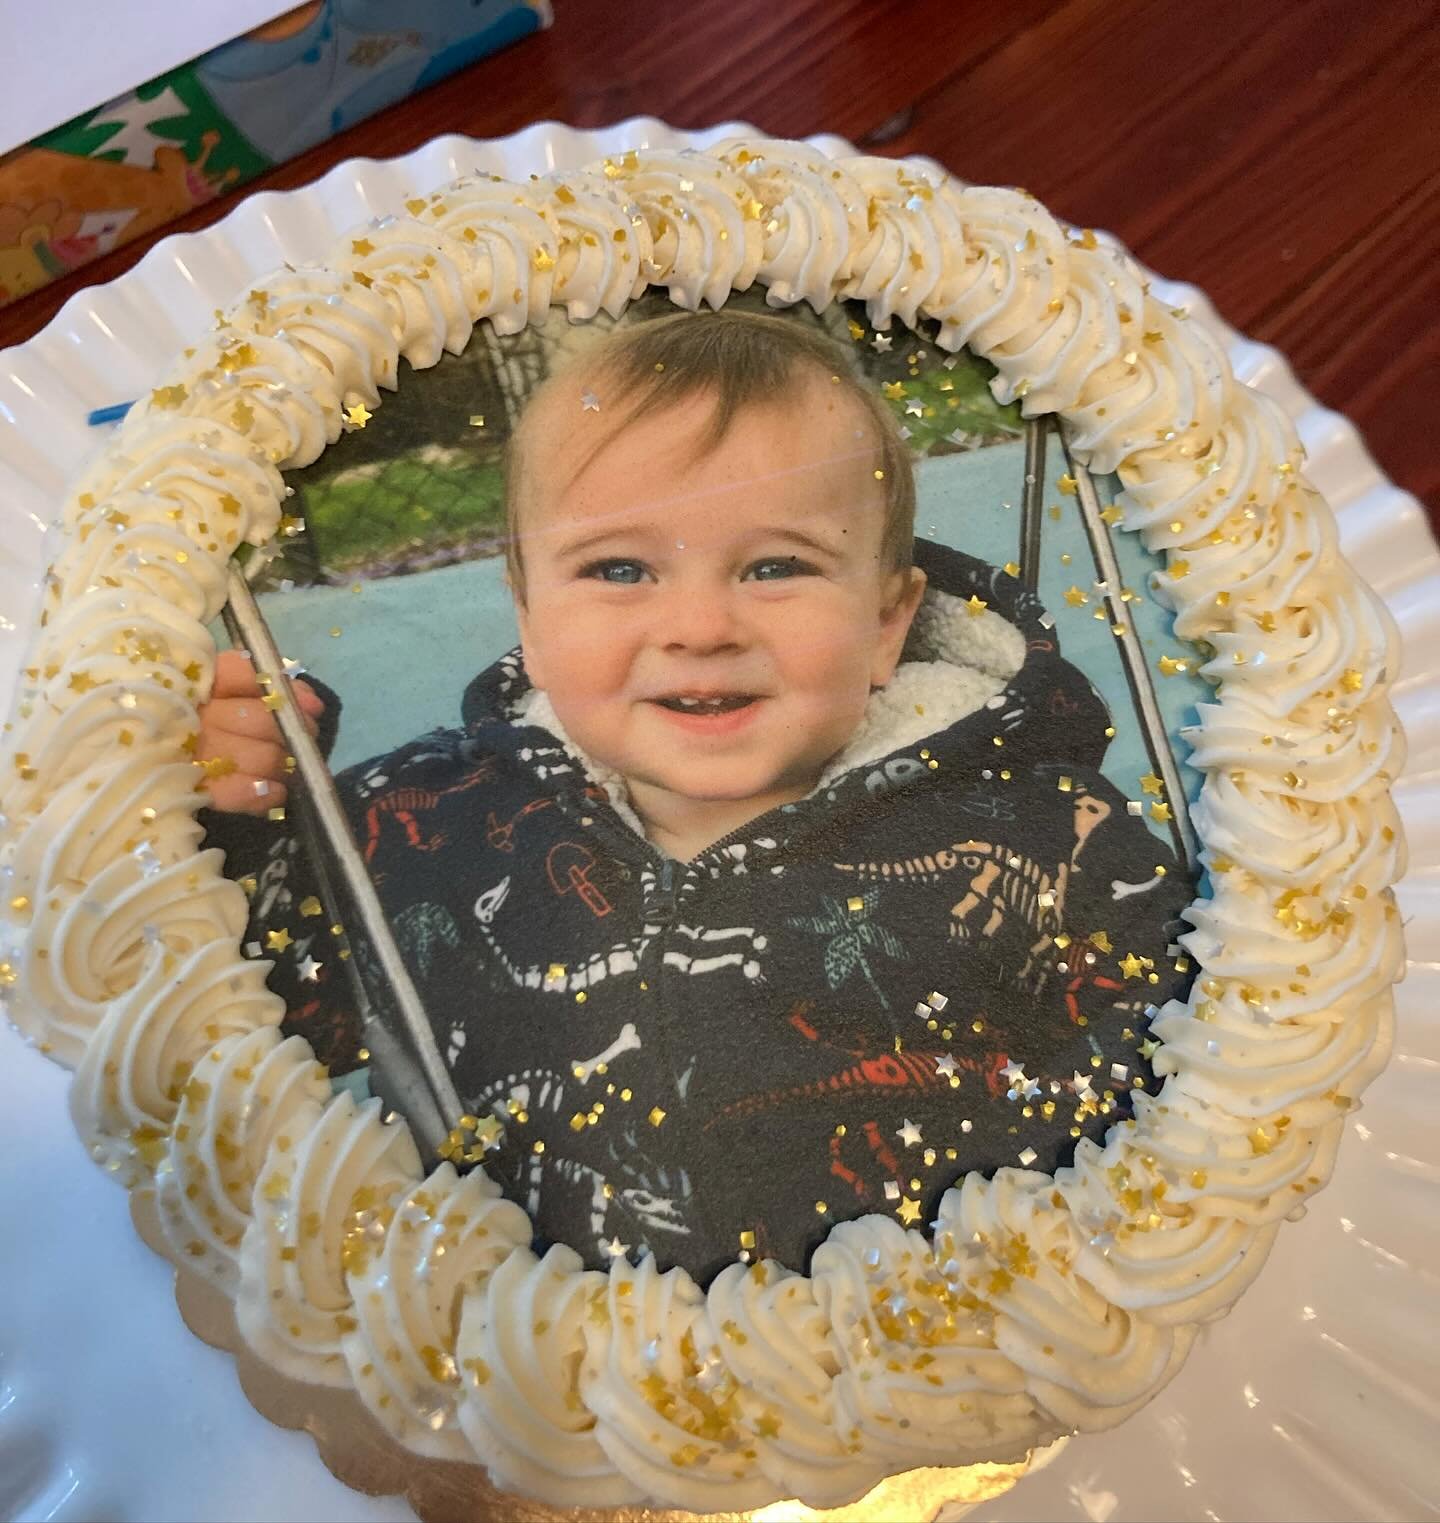 Big brother wanted the little guys pic on the cake. &ldquo;He&rsquo;s cute so that&rsquo;ll make a very cute cake.&rdquo;

Inside our family favorite - chocolate cake with salted caramel filling. 

 
  #westorange #westorangenj #westorangebakery #sou